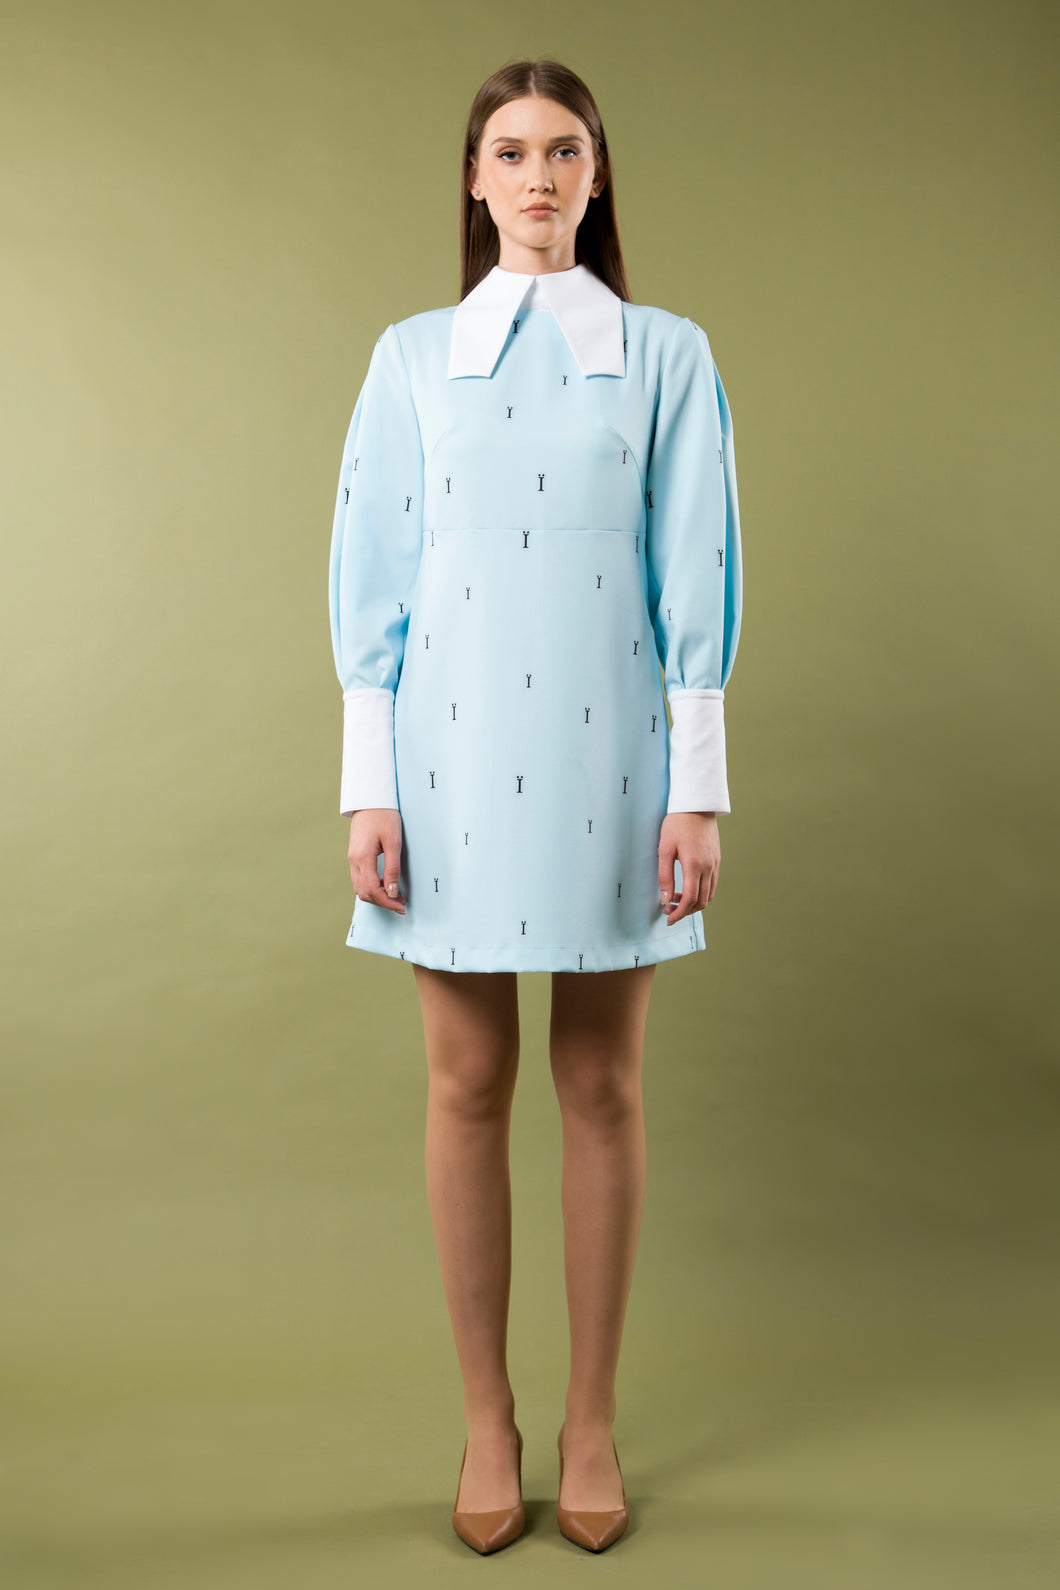 Light blue dress with white collar and cuffs